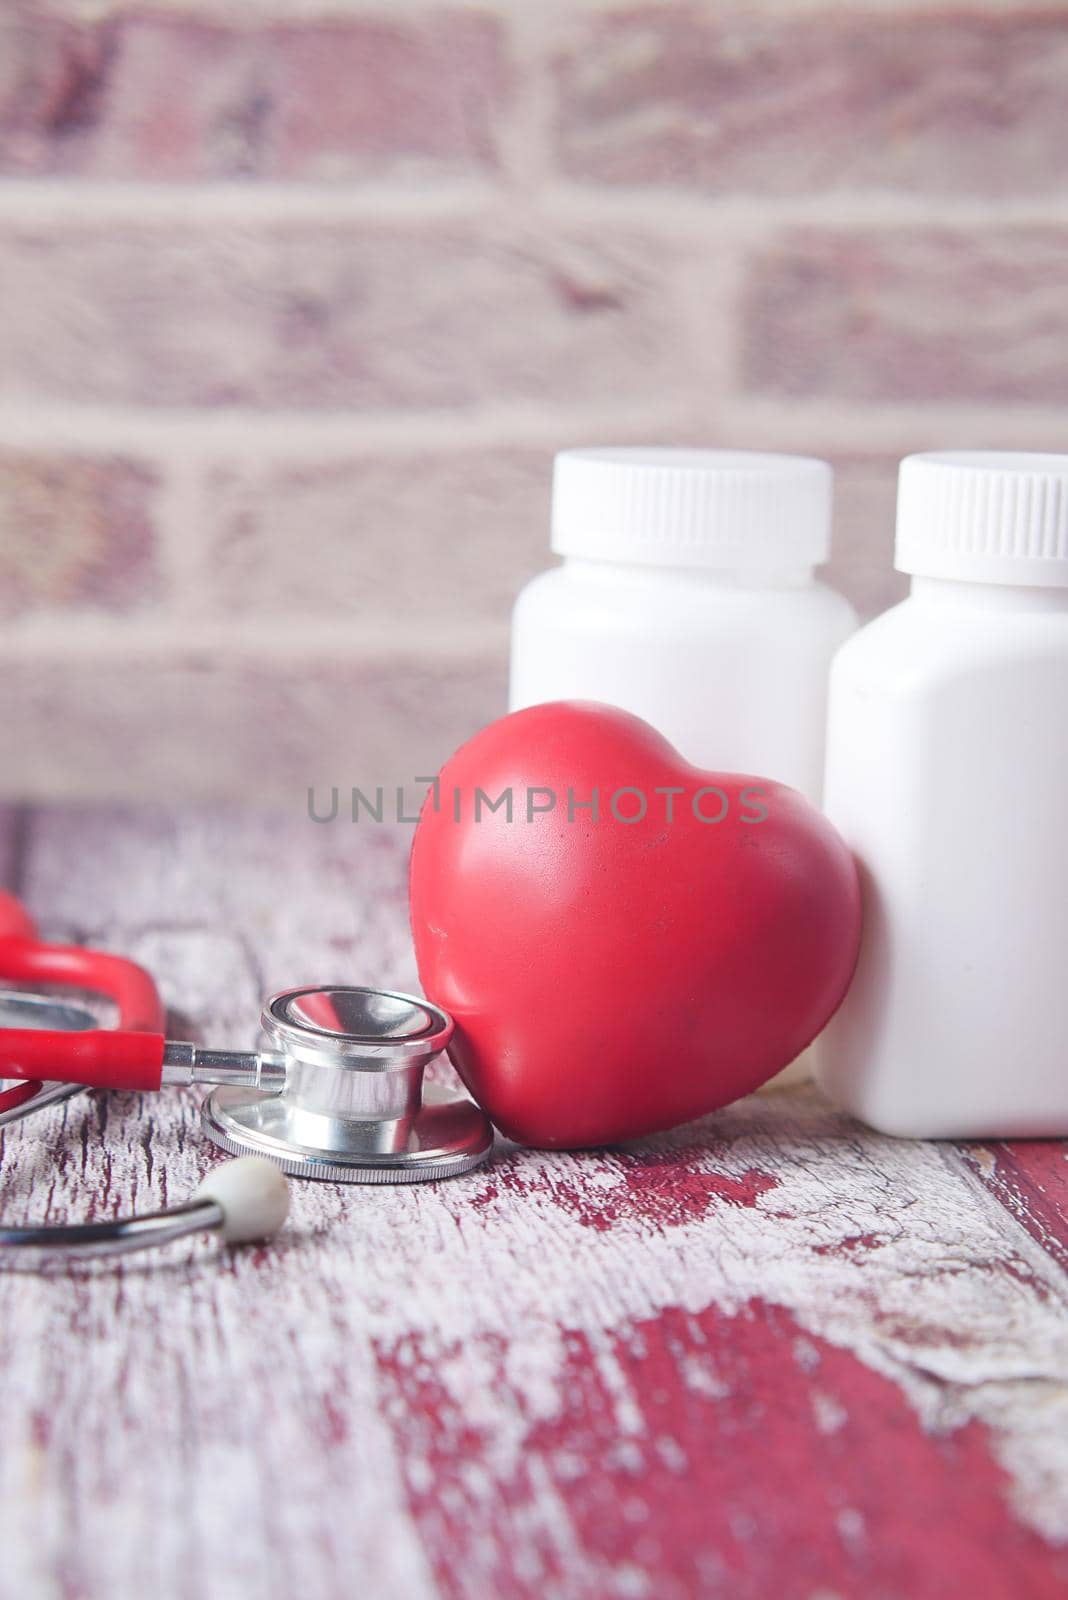 heart shape symbol and stethoscope on table by towfiq007